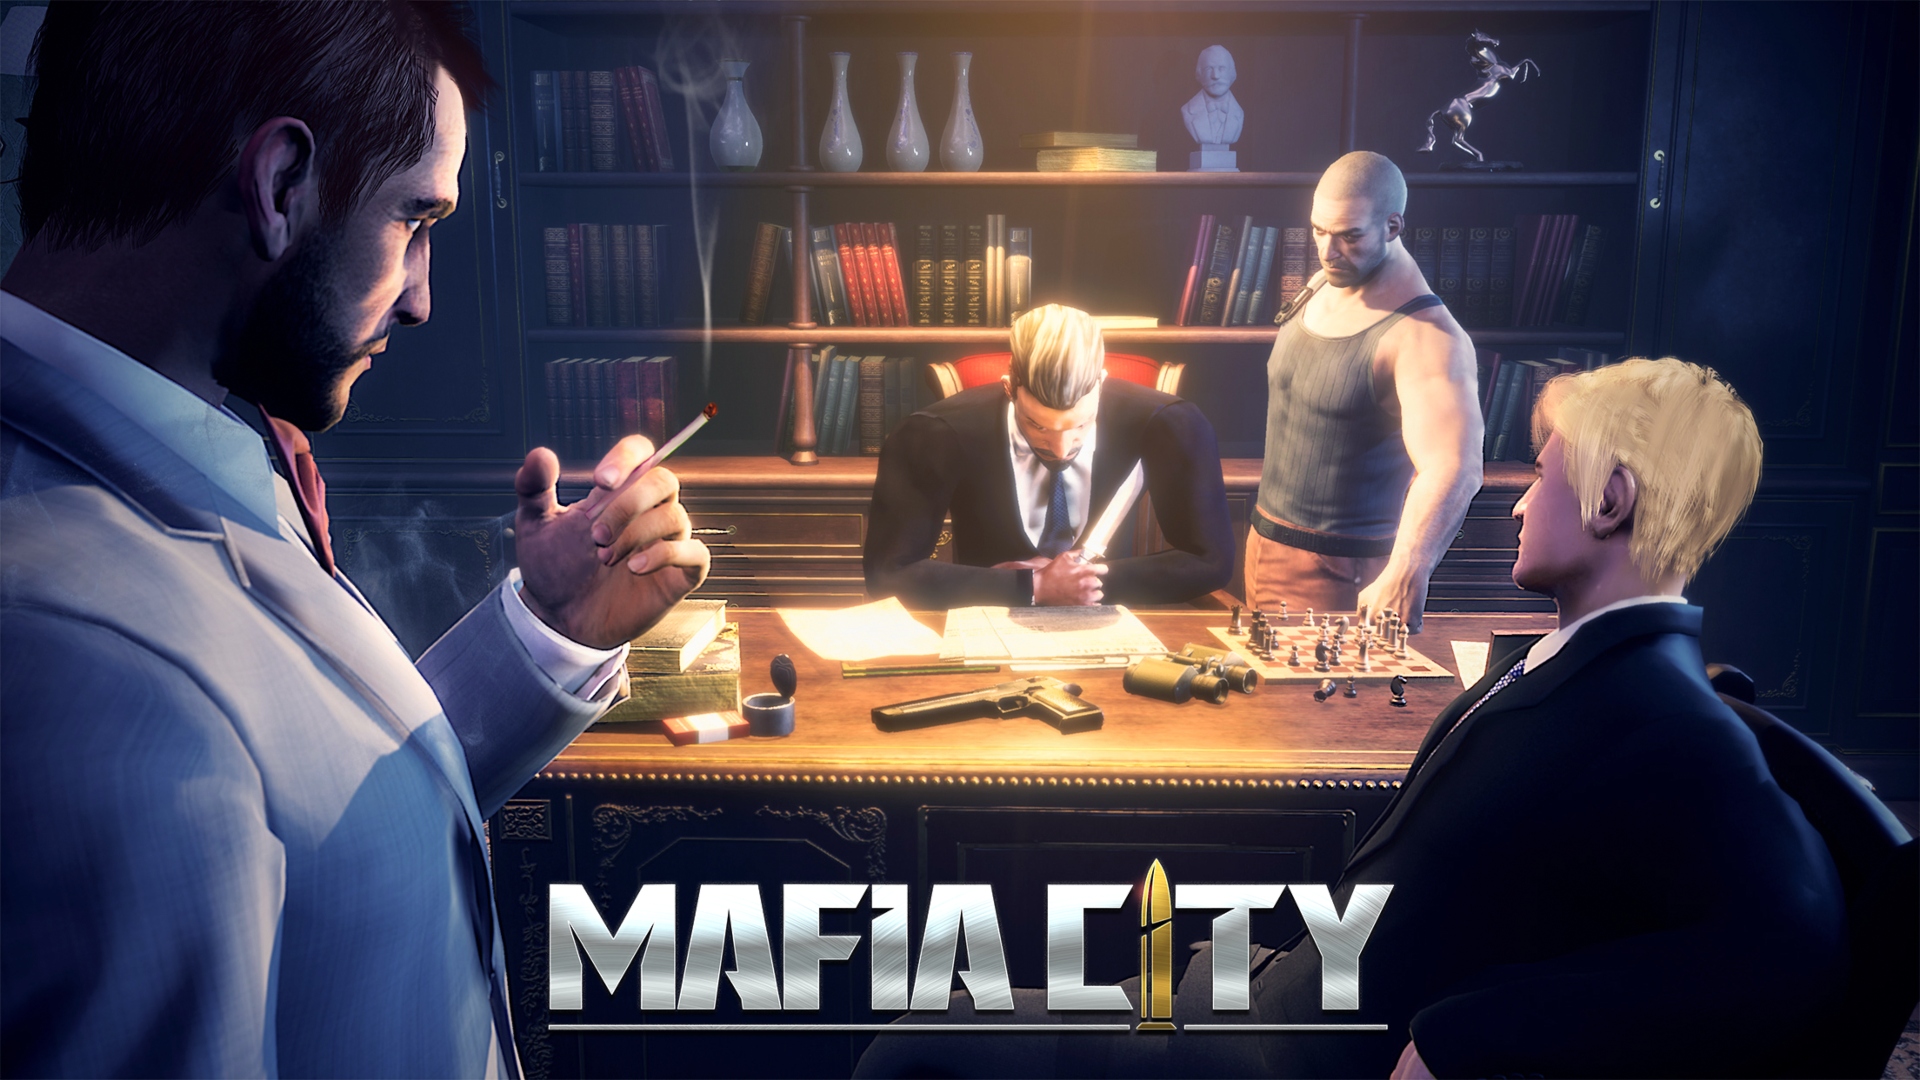 Addictive games - Mafia City. Image shows a group of criminals meeting in a shady room, to the bottom of the image is the logo of Mafia City.